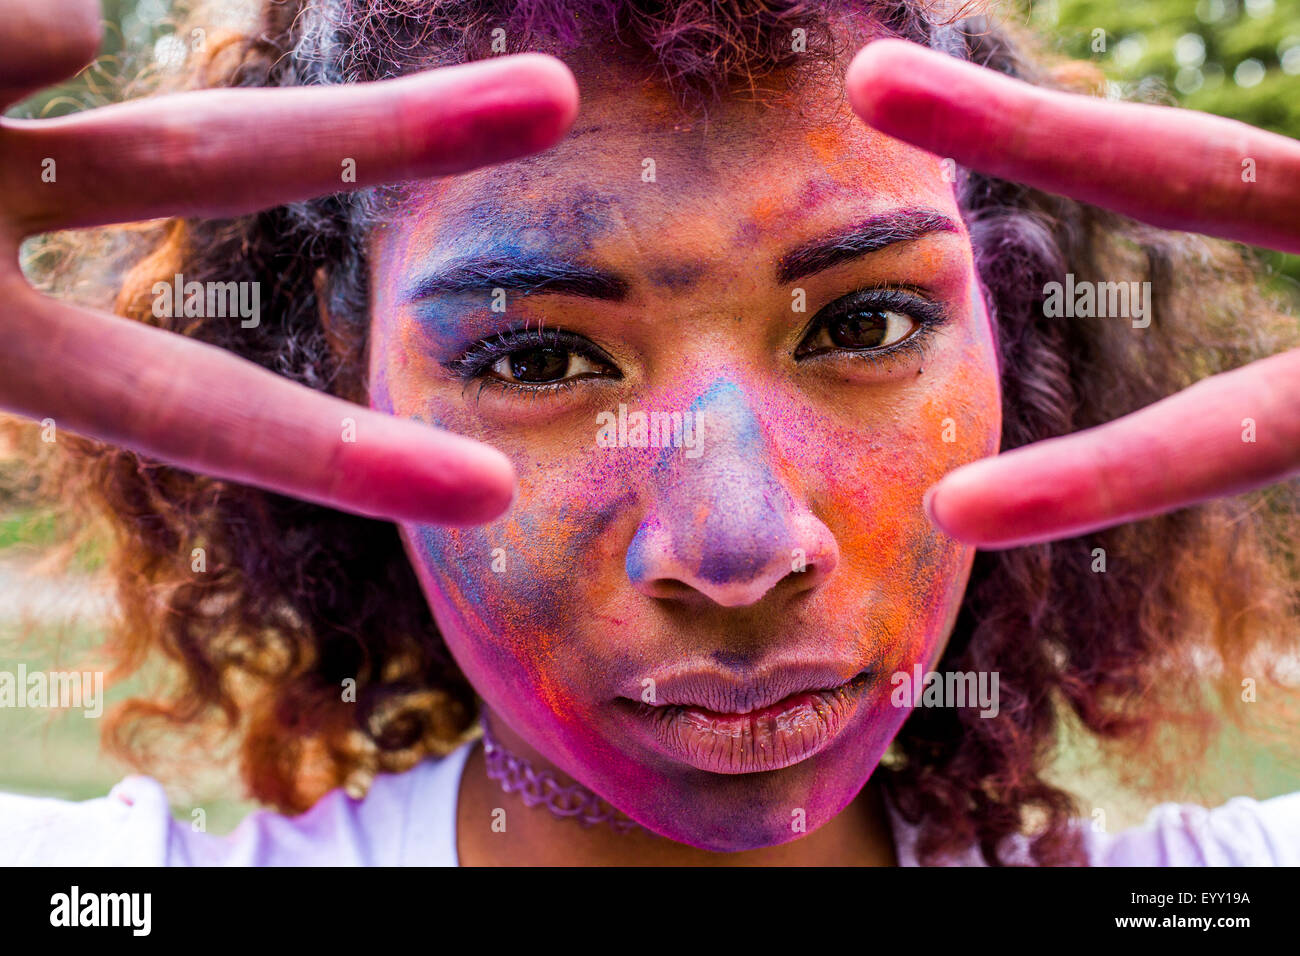 Mixed race woman covered in pigment powder gesturing peace signs Stock Photo